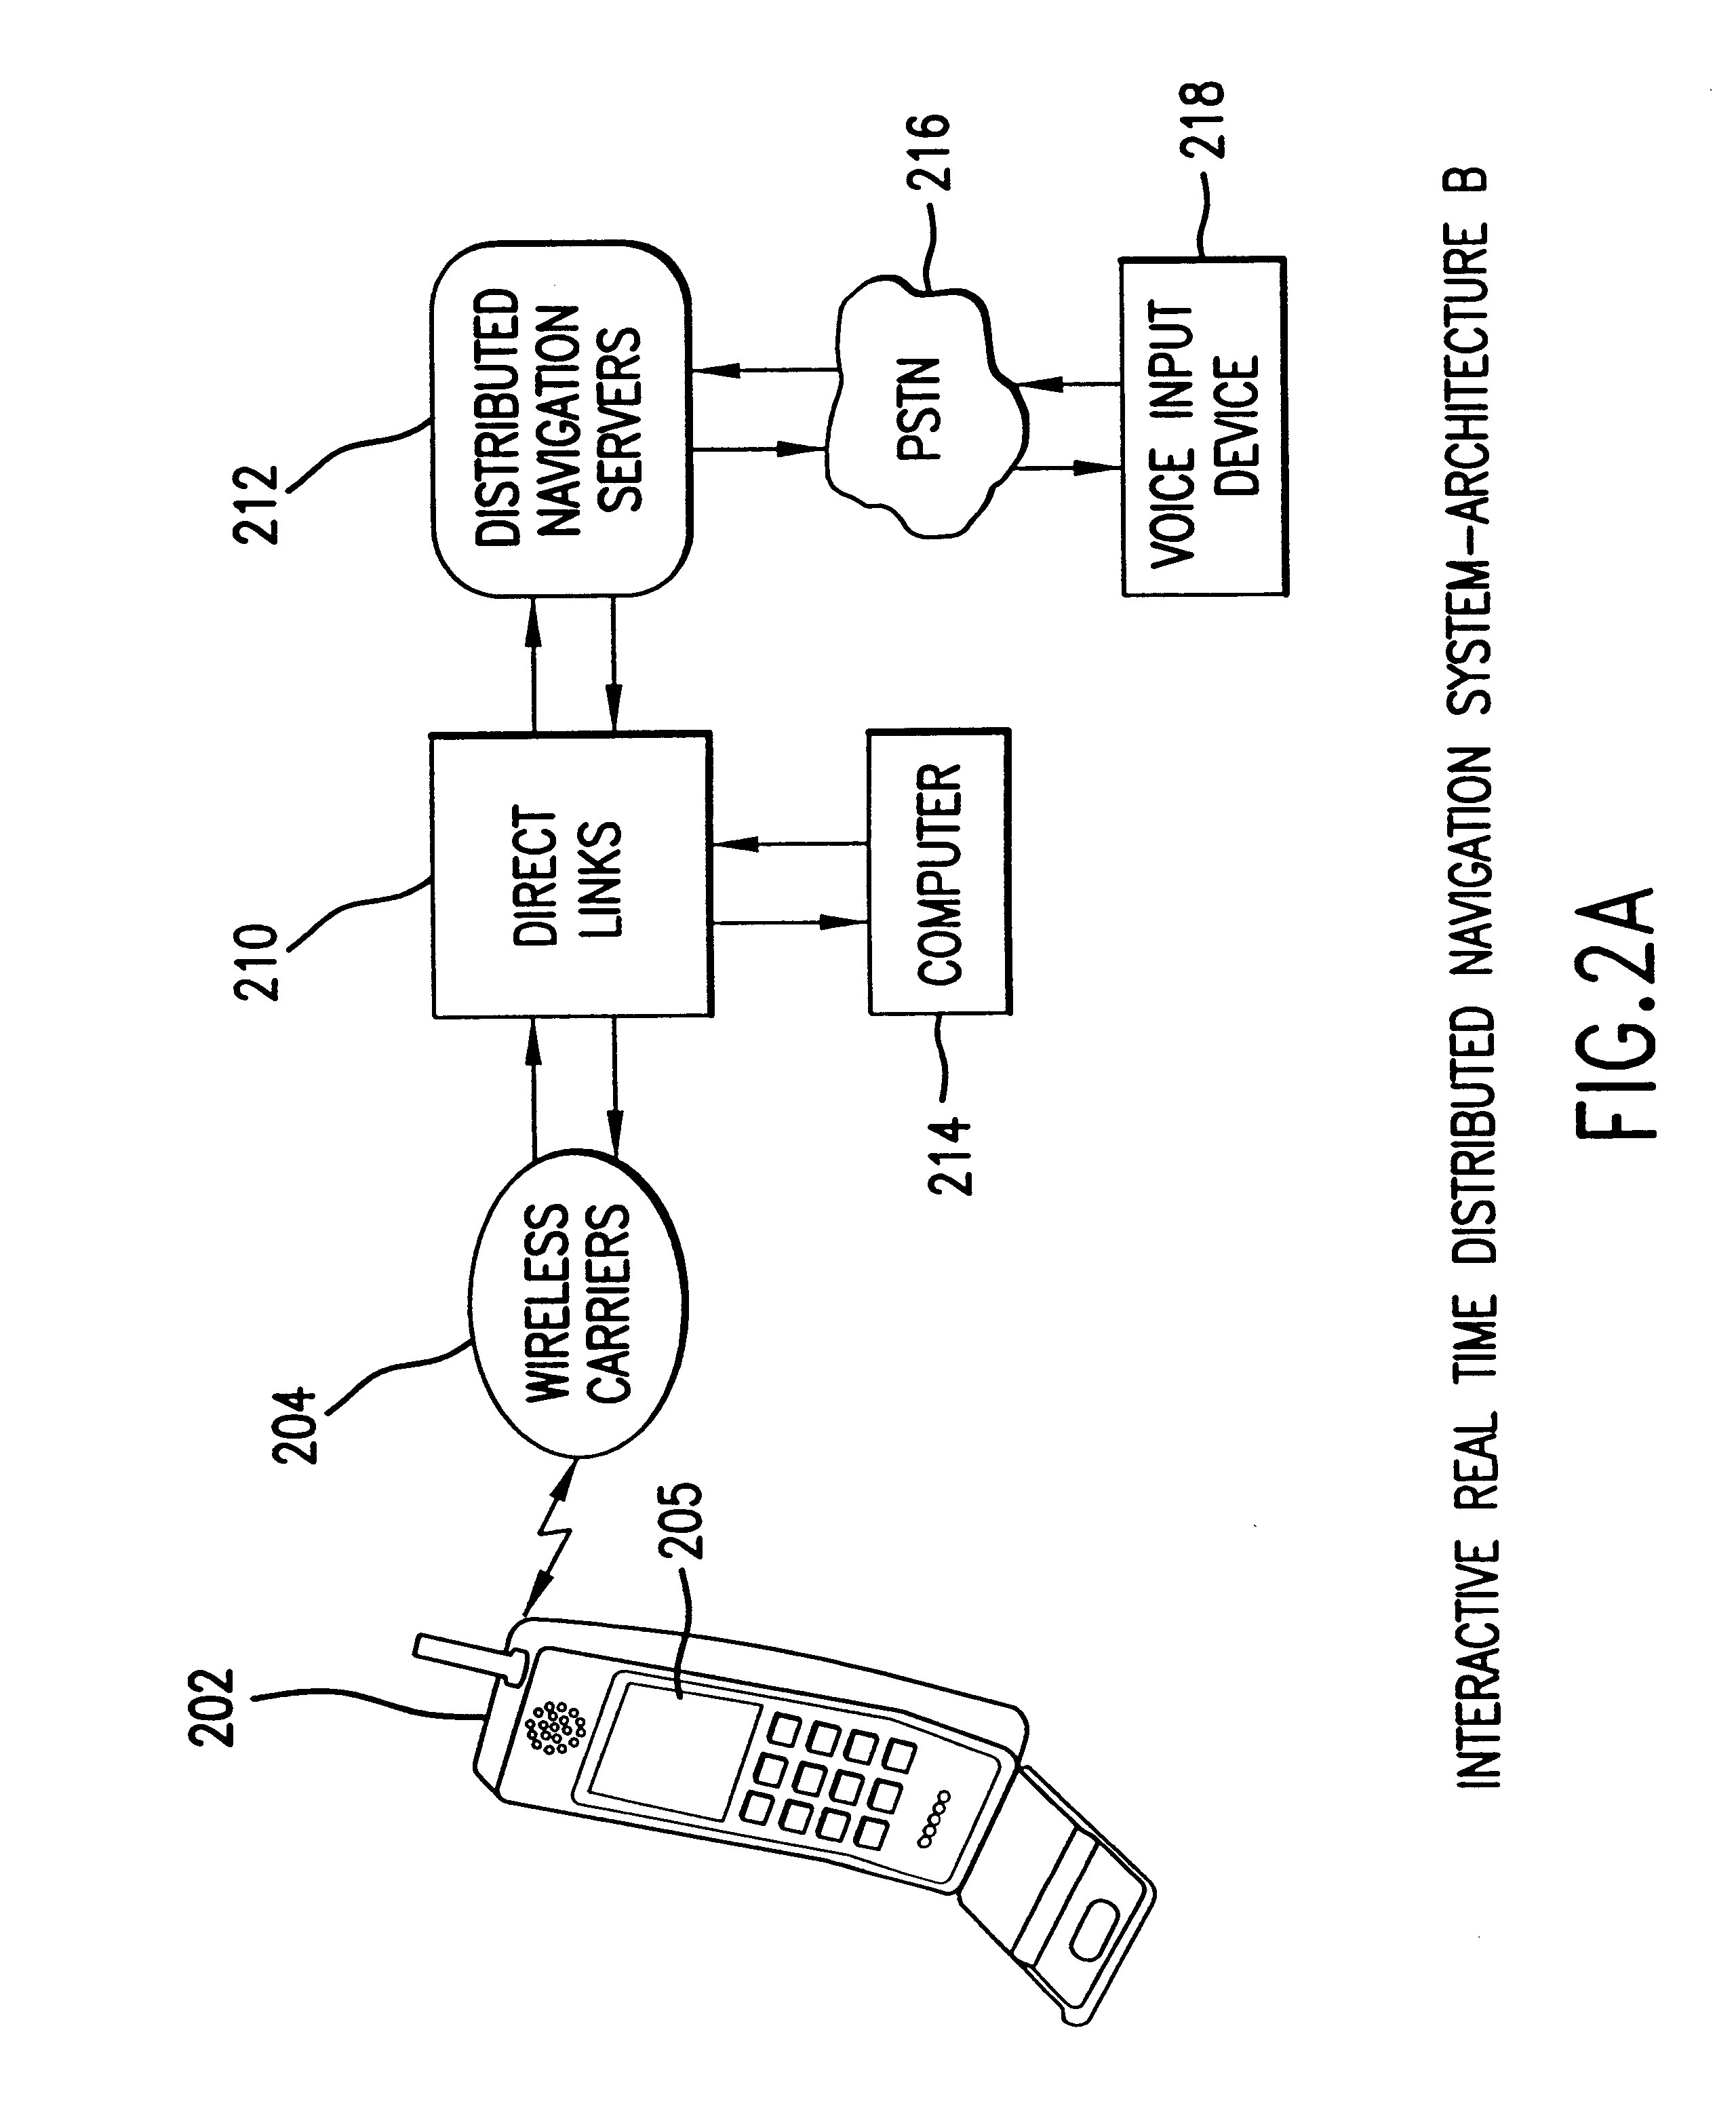 Method and system for an efficient operating environment in a real-time navigation system